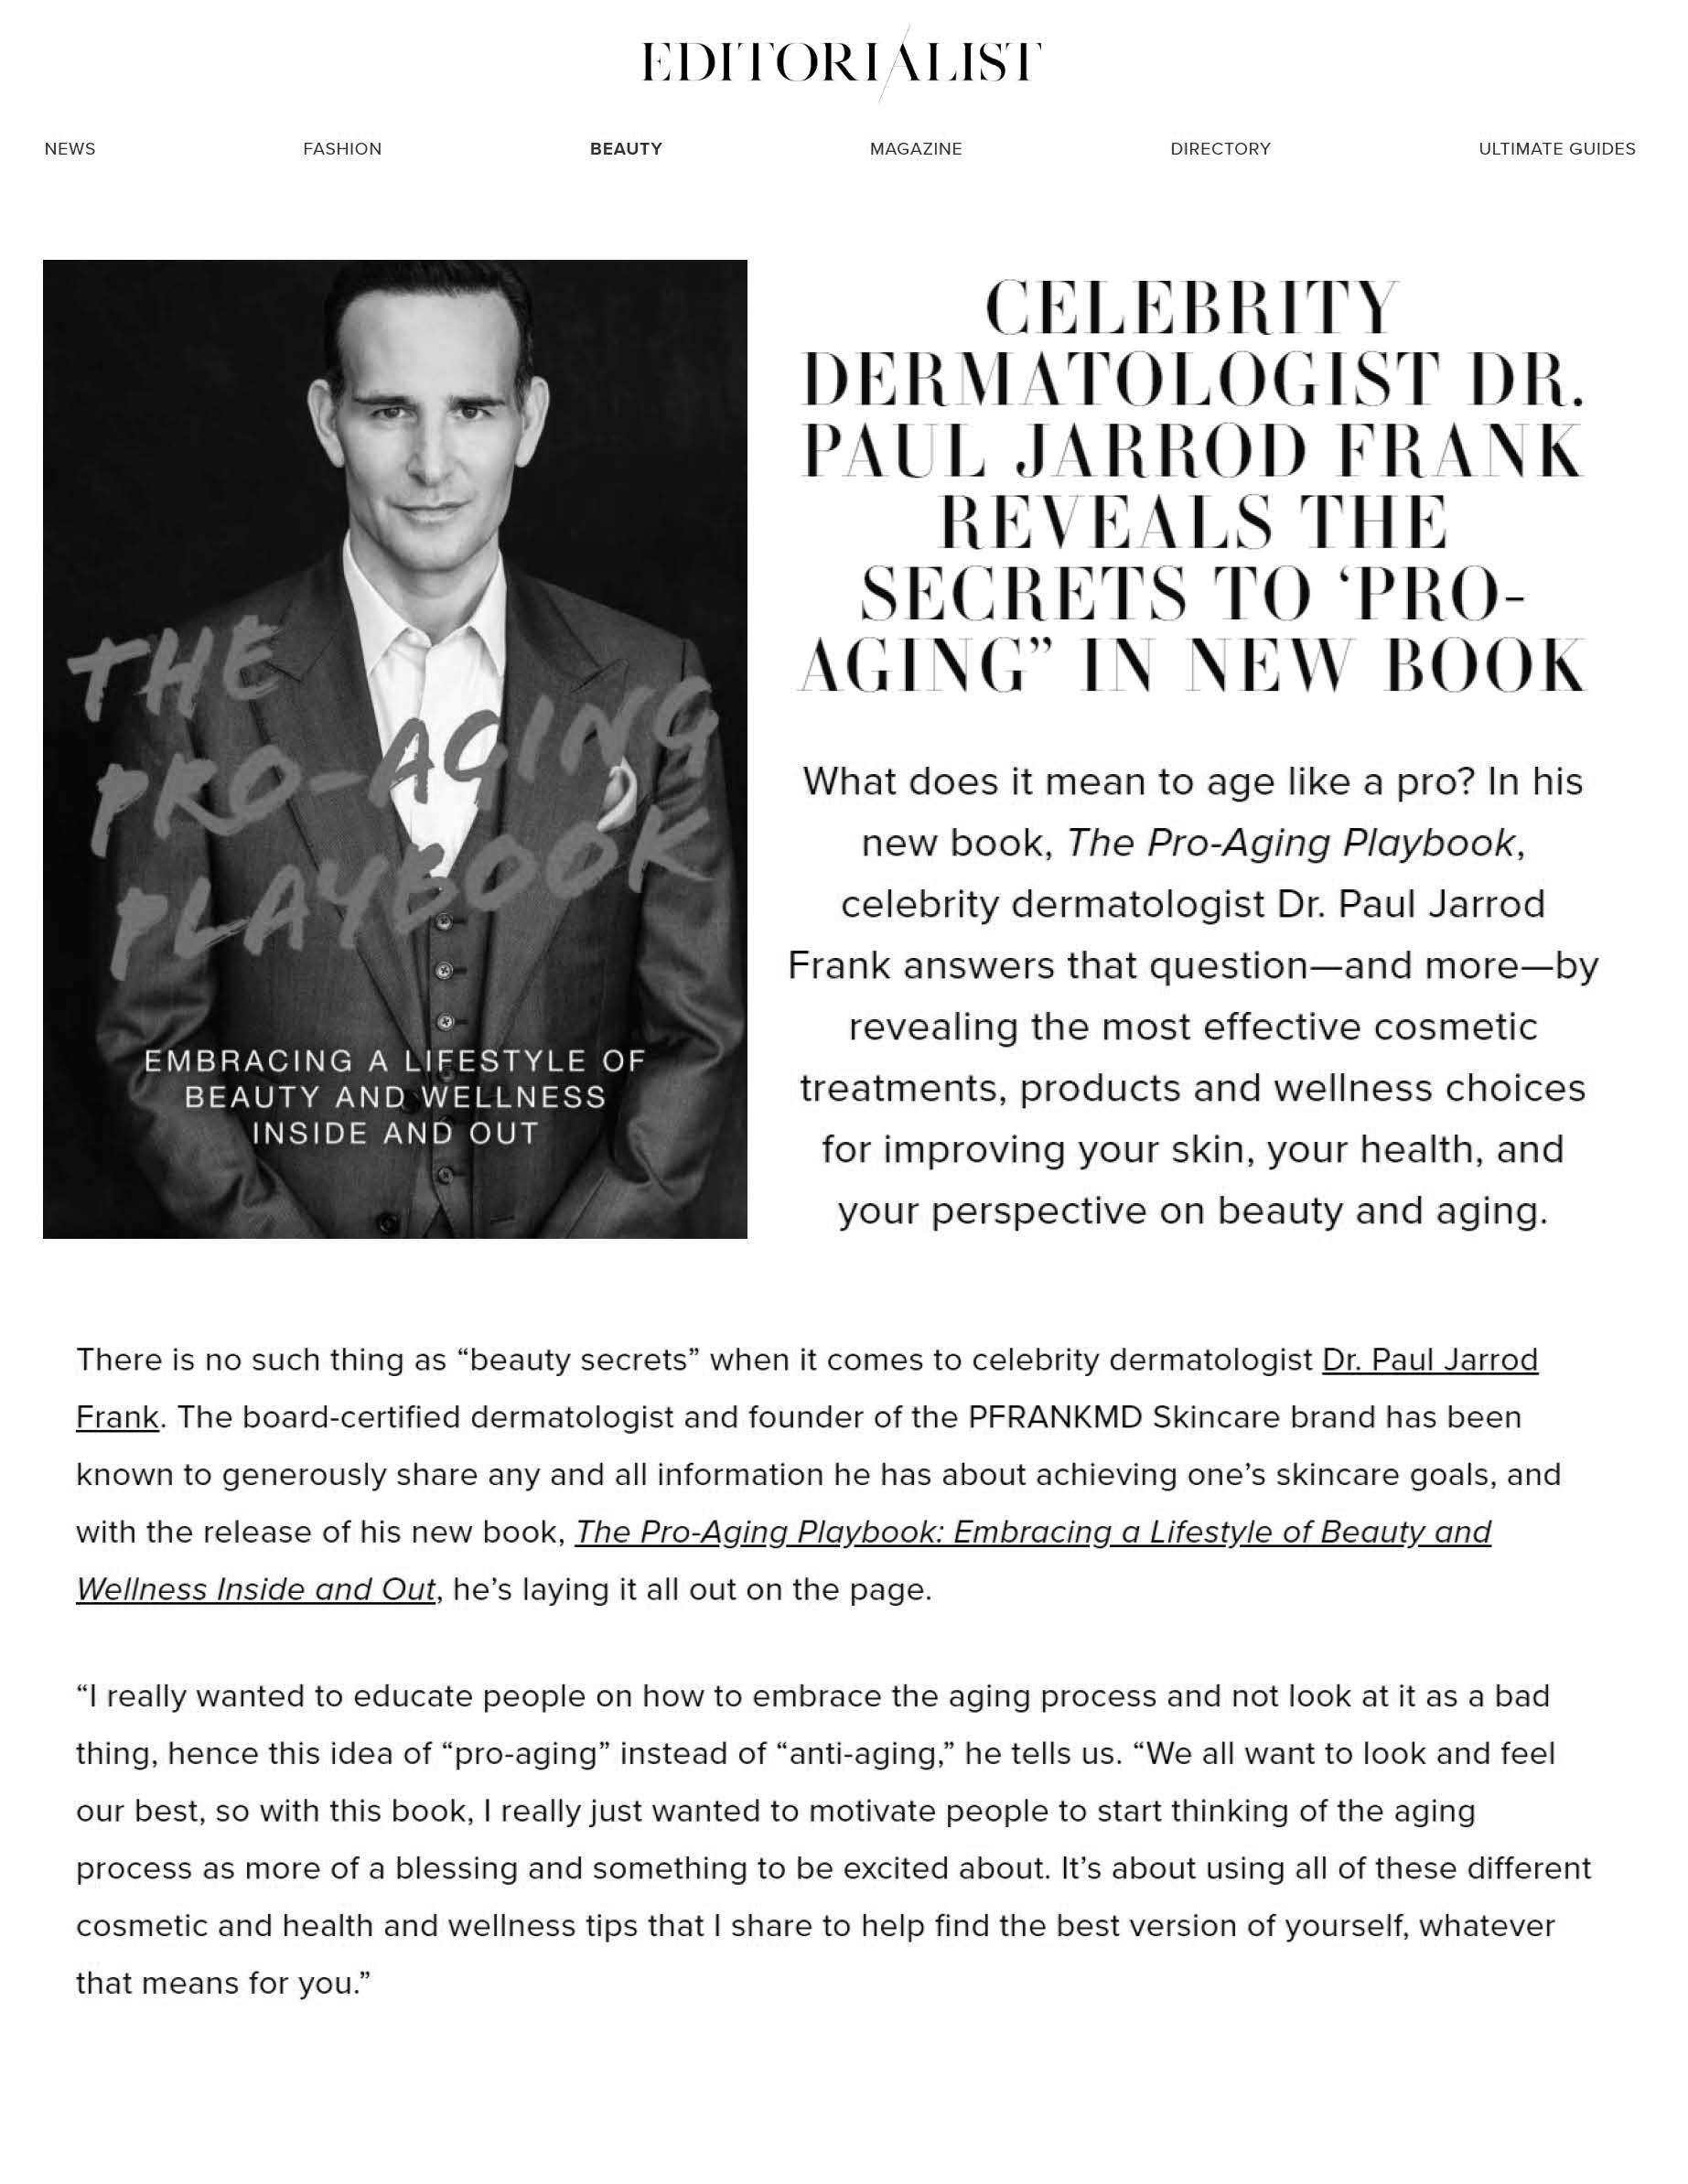 EDITORIALIST featured The Pro-Aging Playbook by Dr. Paul Jarrod Frank of PFrankMD